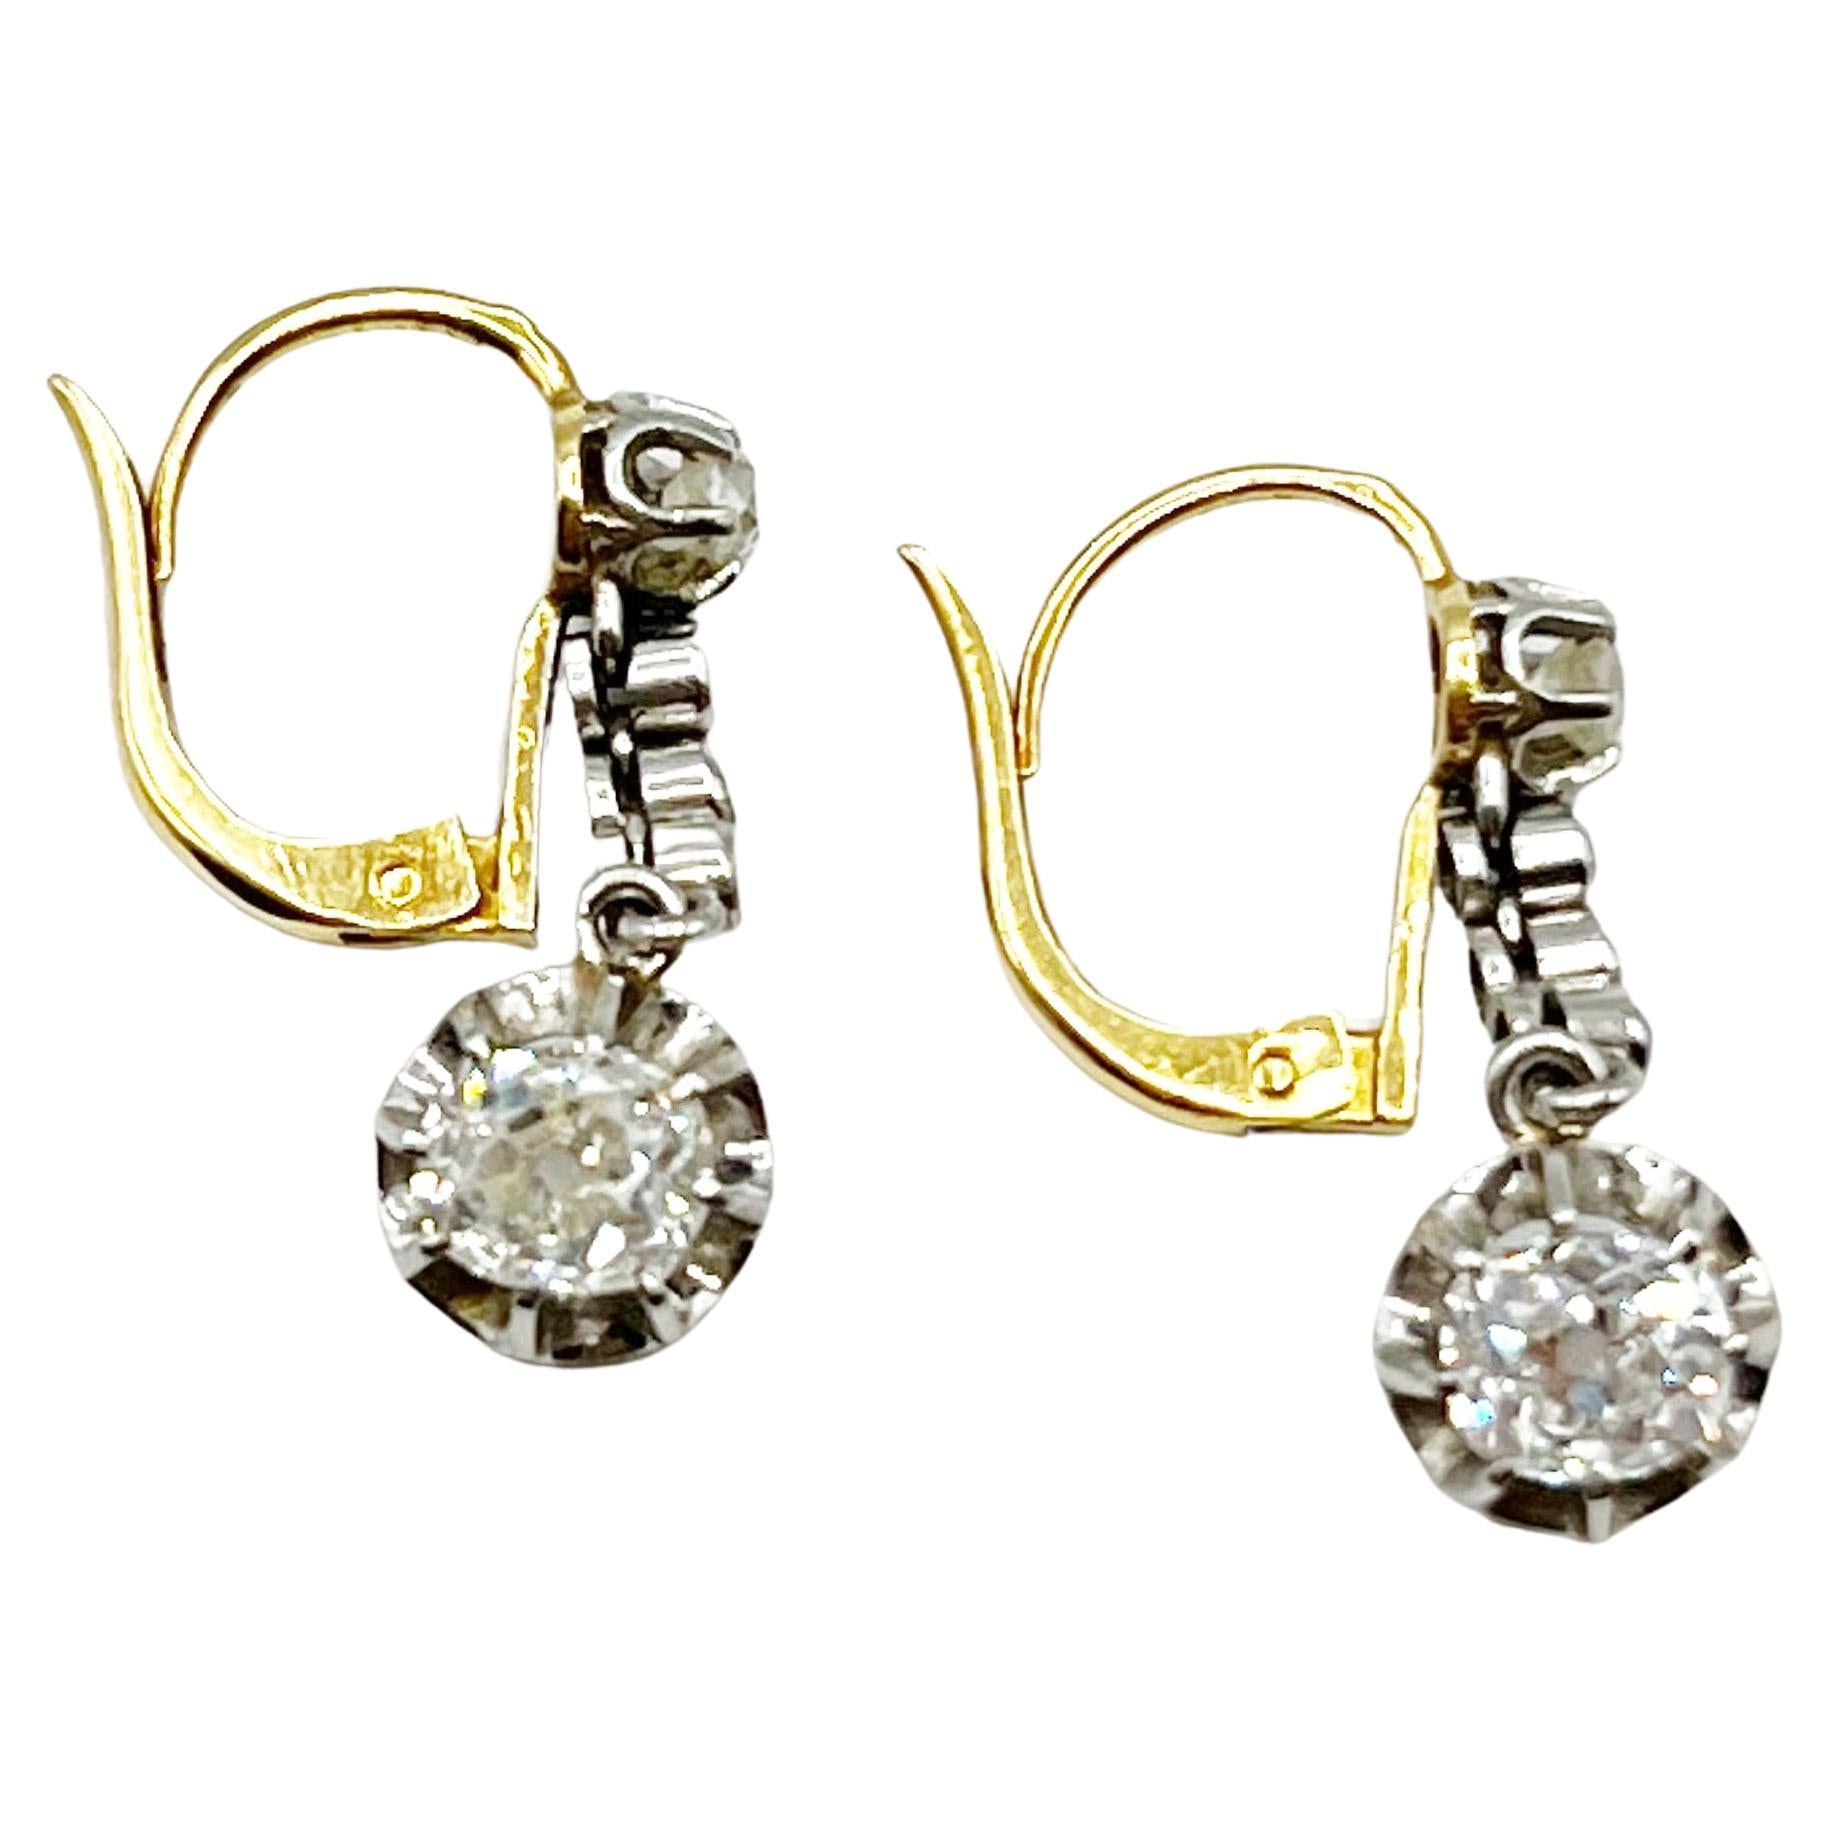 These stunning diamond earrings are classic and timeless. The length is perfect for an elegant night out or to wear for every day dressing. The two diamonds on the bottom of the earrings equal 1.7 + carats. All of the diamonds are Old Mine Cut and